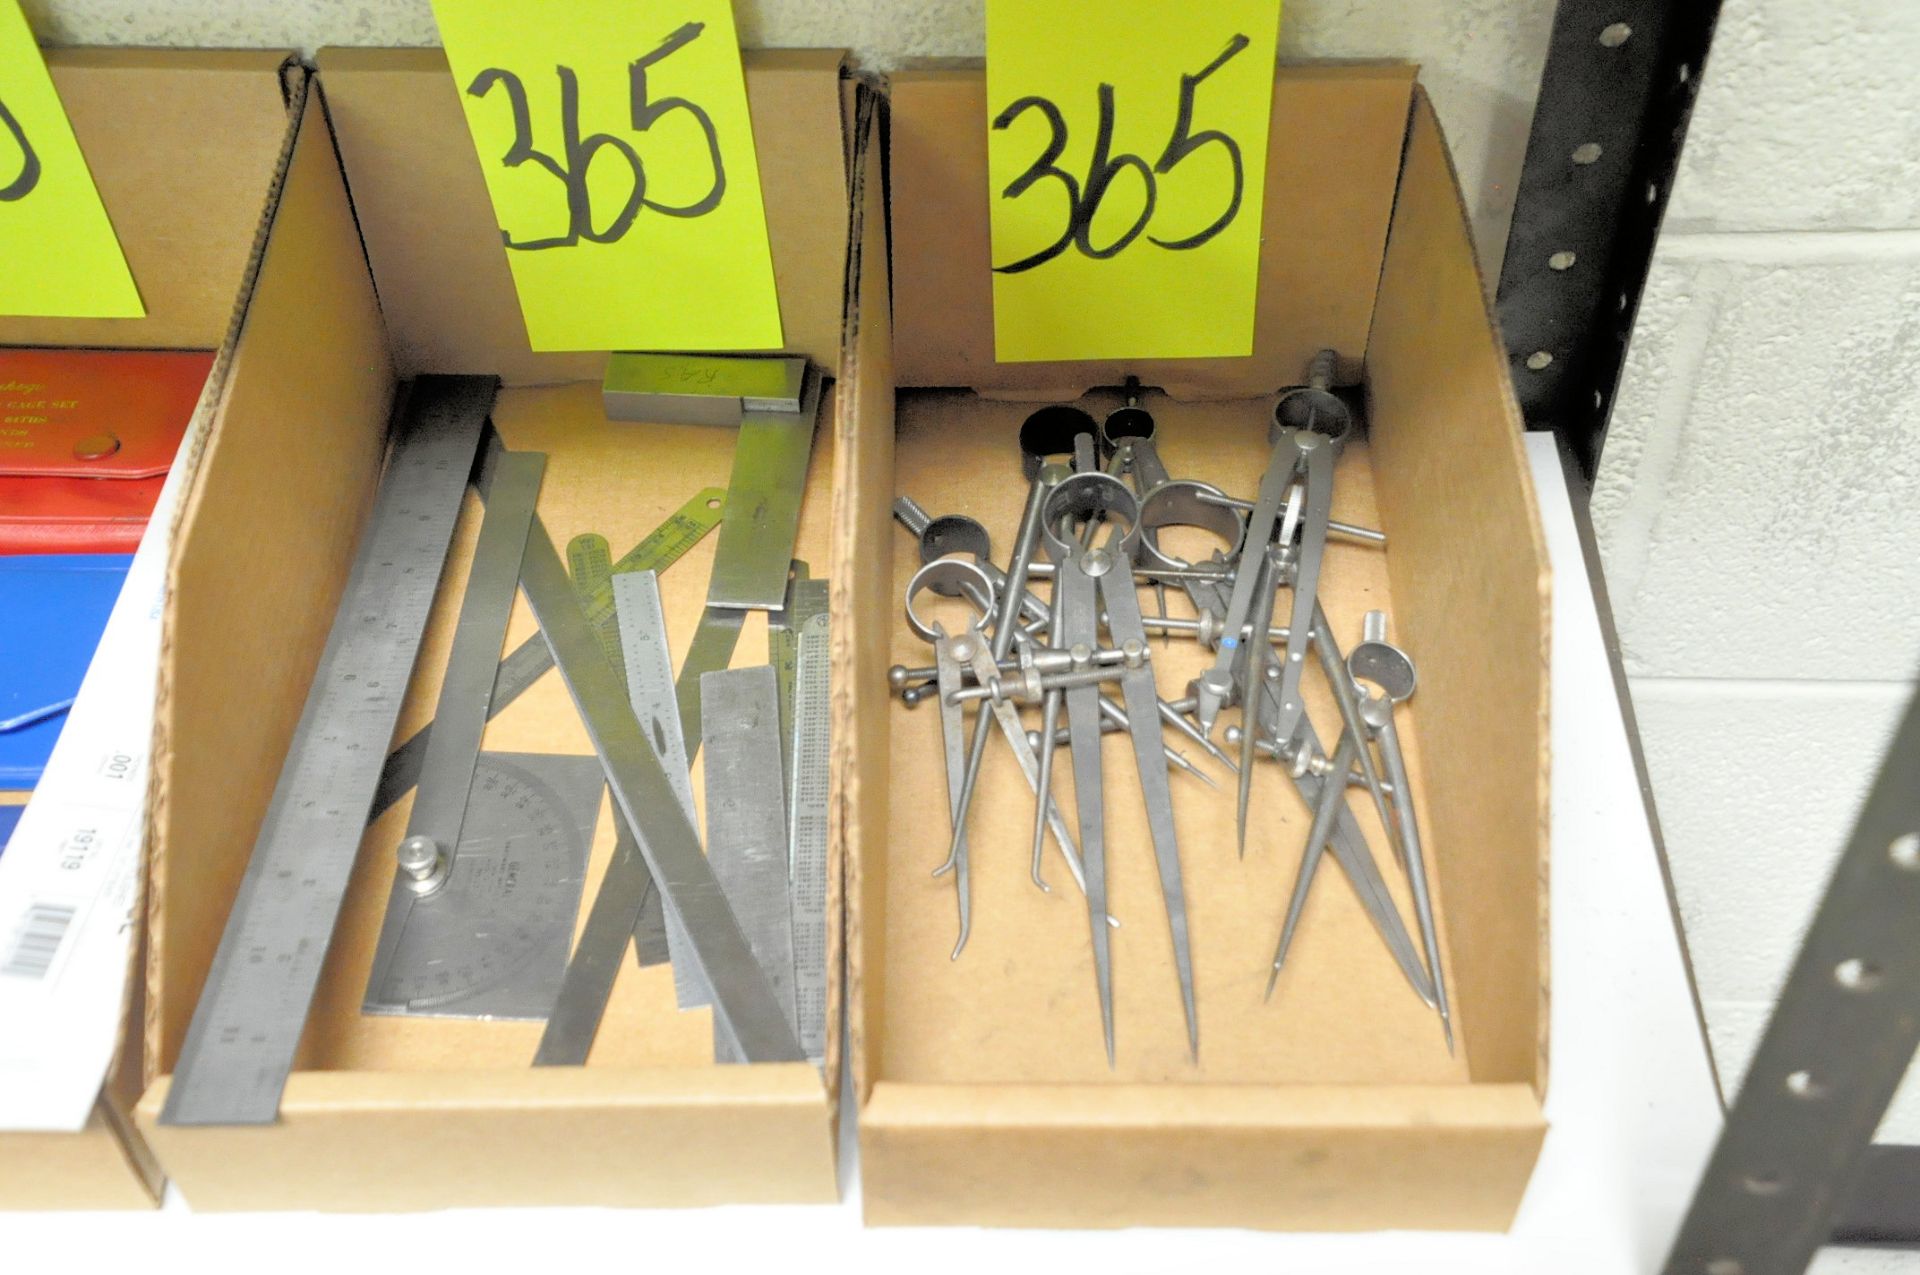 Lot-Steel Pocket Rules, Manual Calipers, Radius Gauges, etc. in (4) Boxes on (1) Shelf - Image 3 of 3